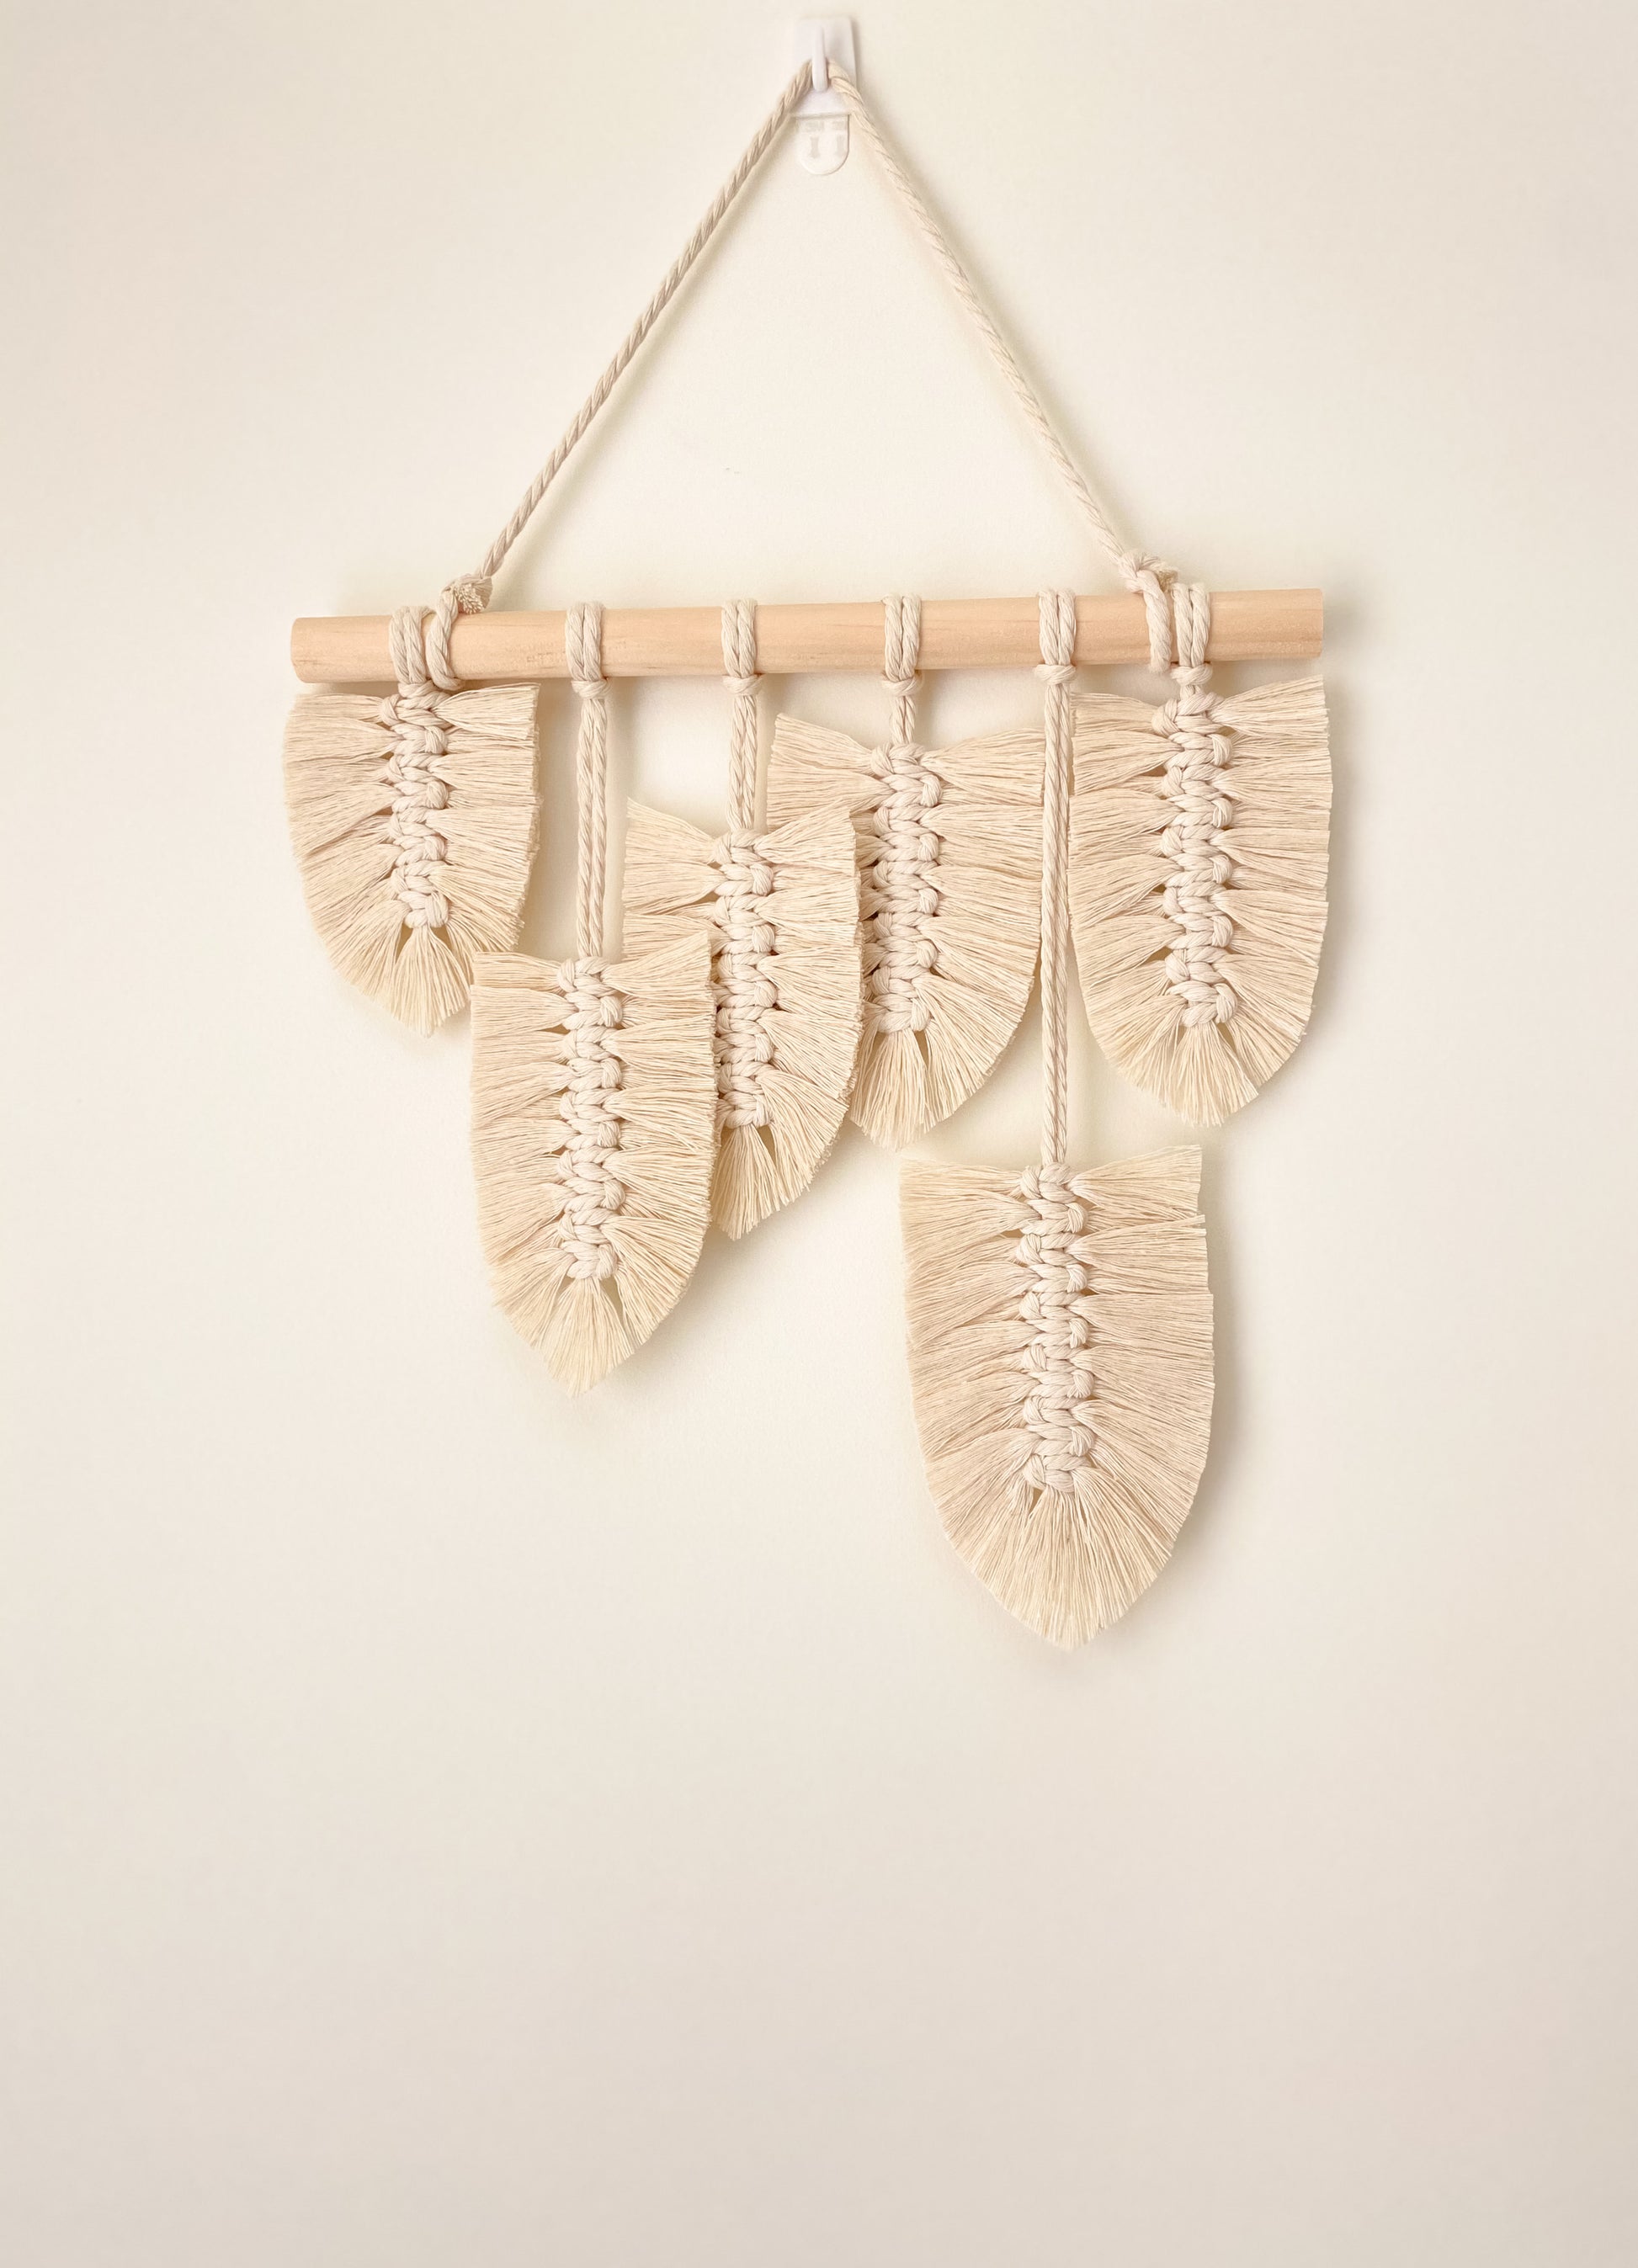 Natural white macrame feather wall hanging hanged on a wall